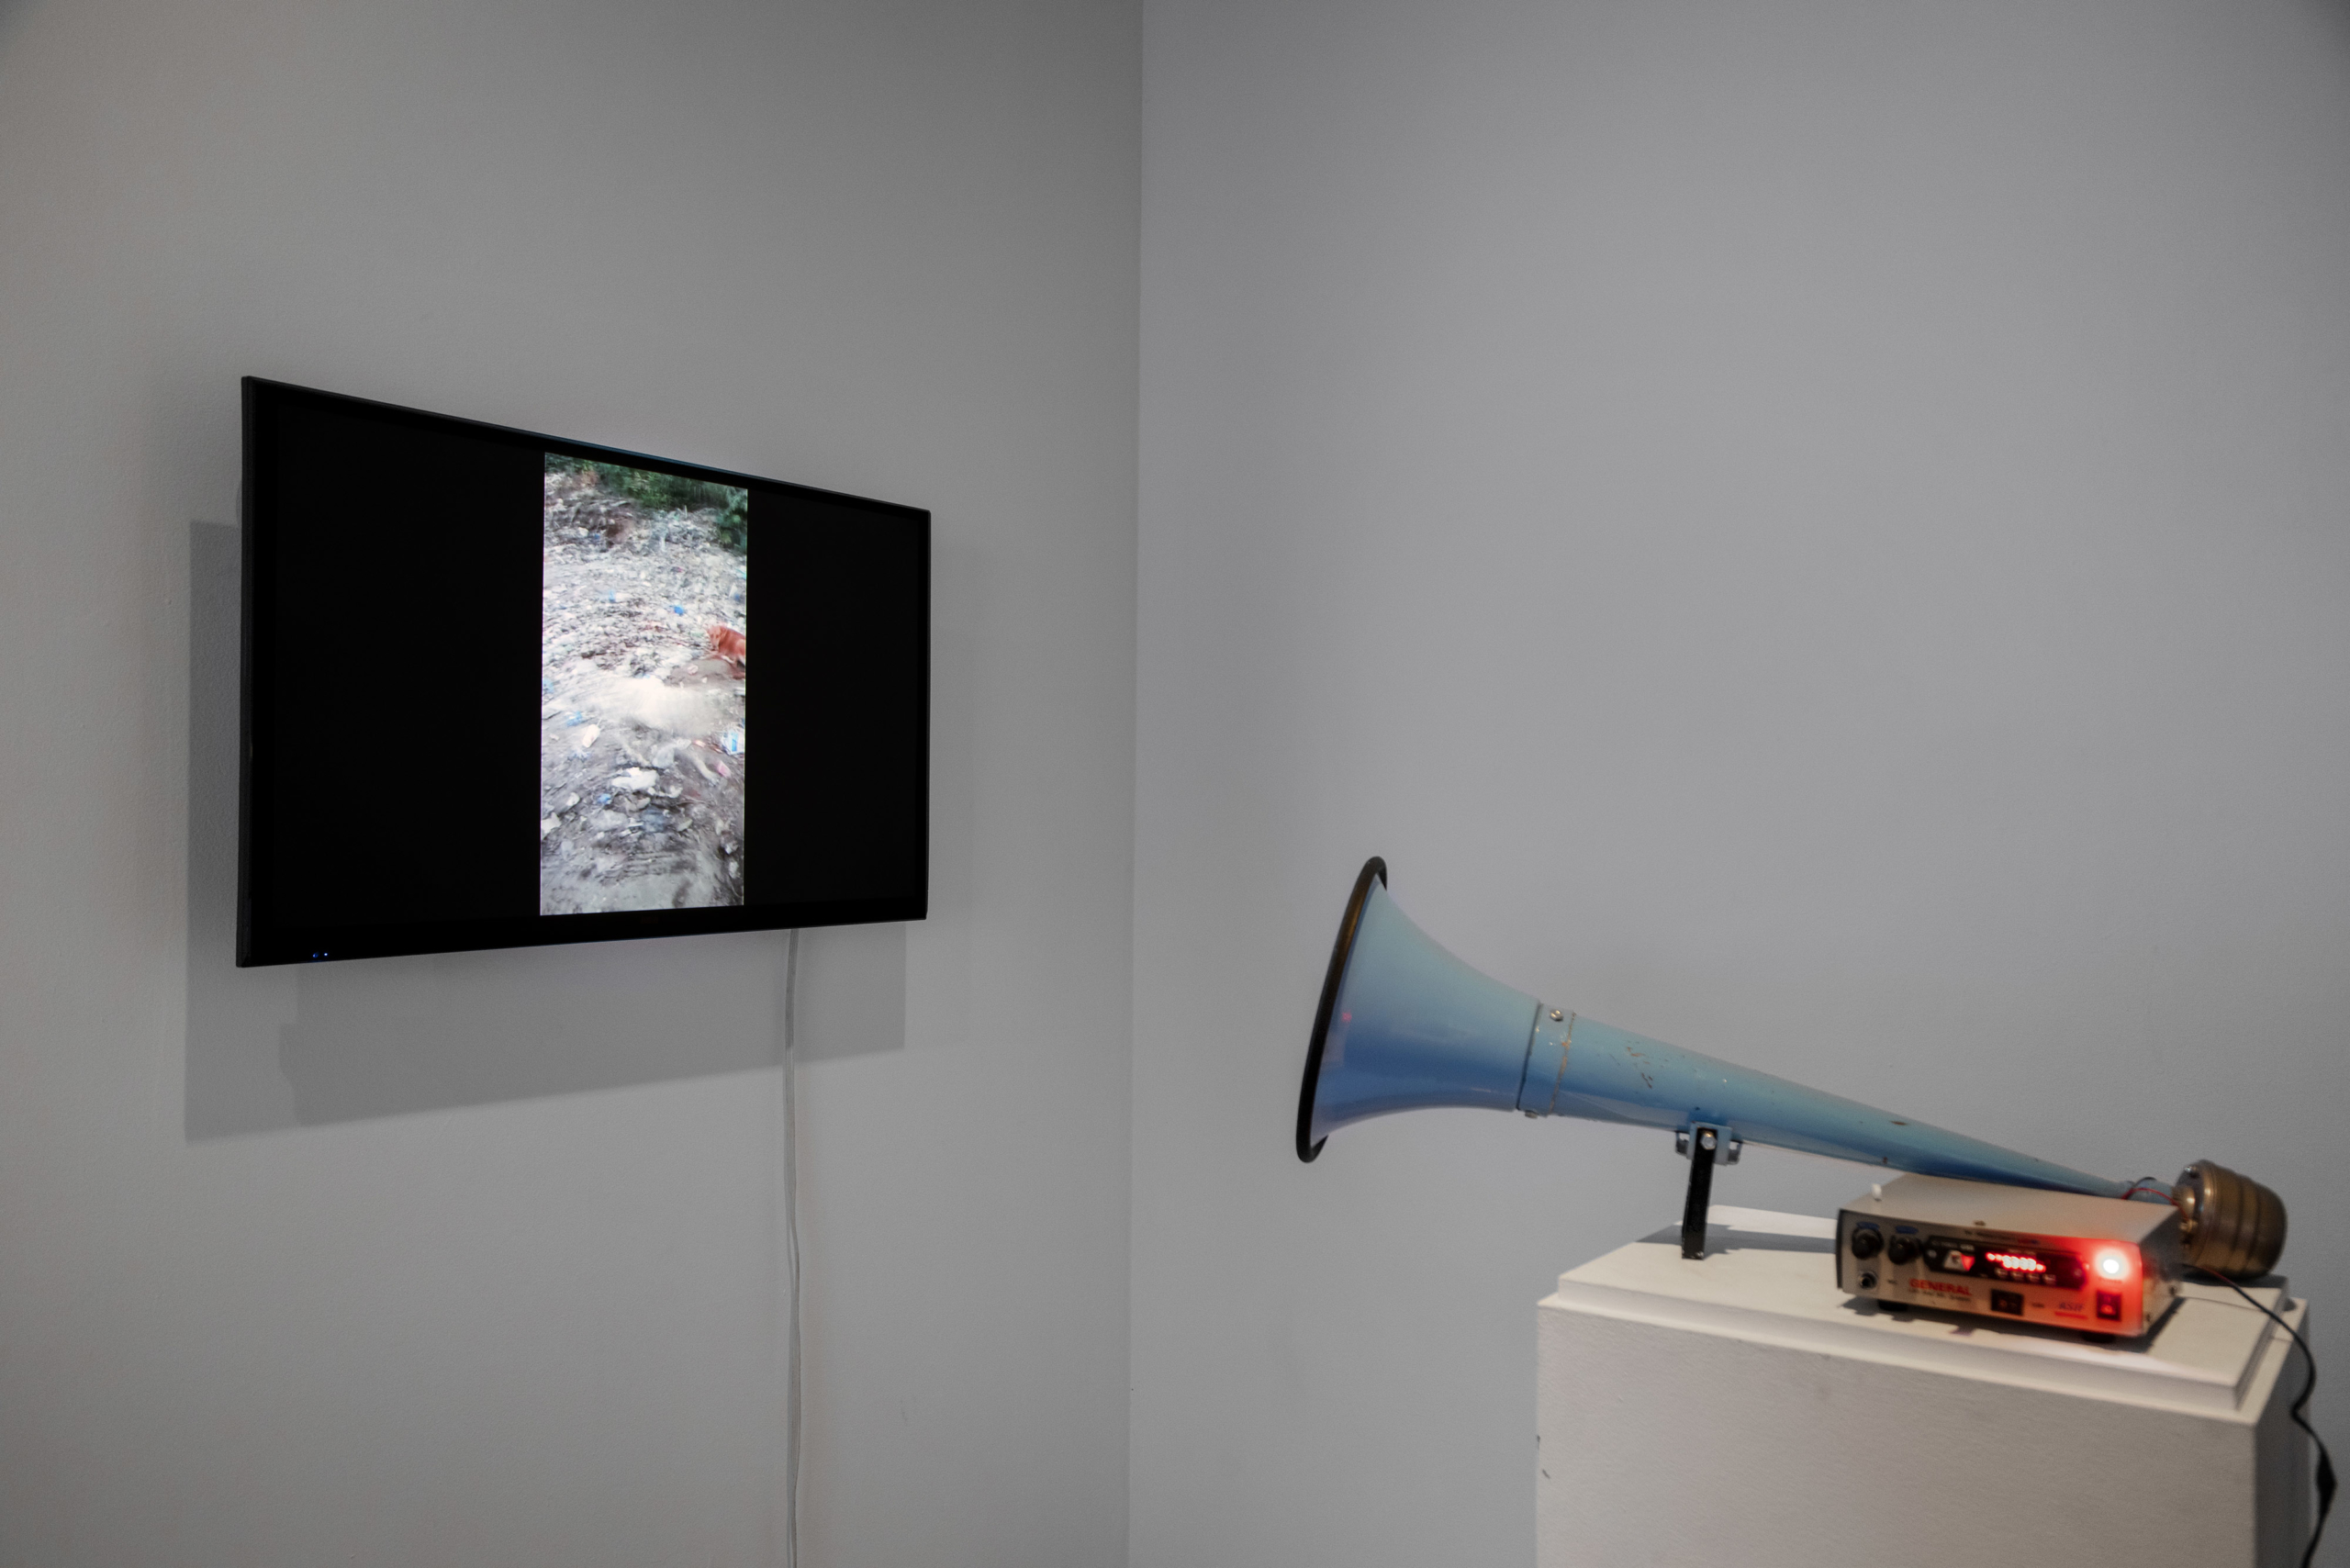 installation which depicts a tv showing a picture of some terrain, and a blue horn sitting on a plinth turned towards the TV